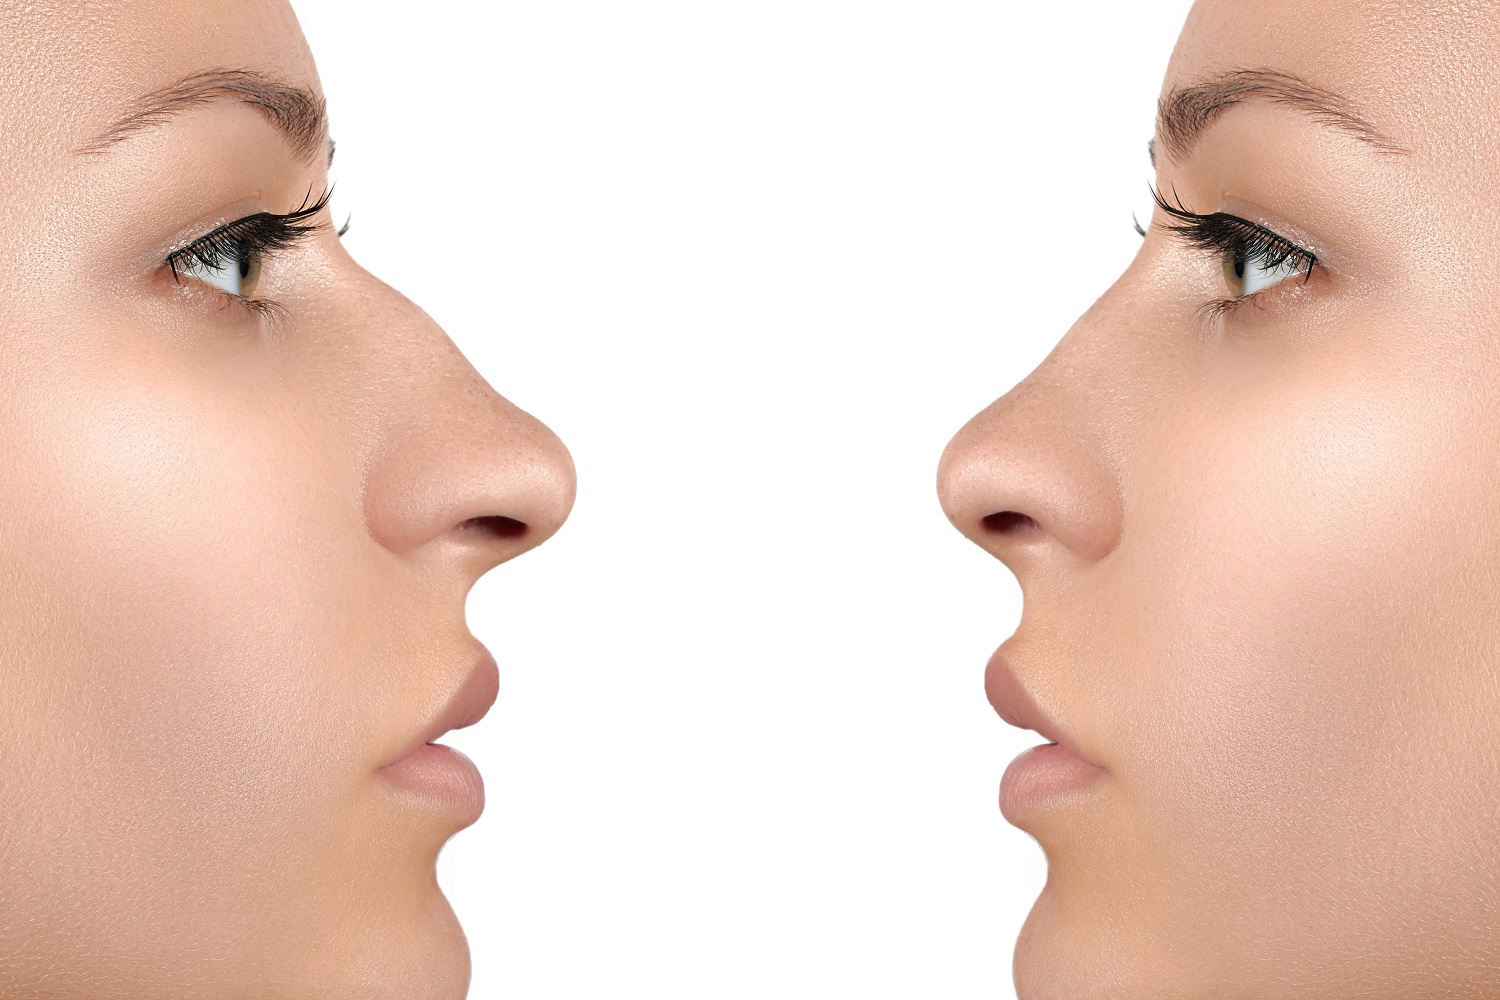 Plastic nose surgery - What is it when you need why it is worth doing it abroad?